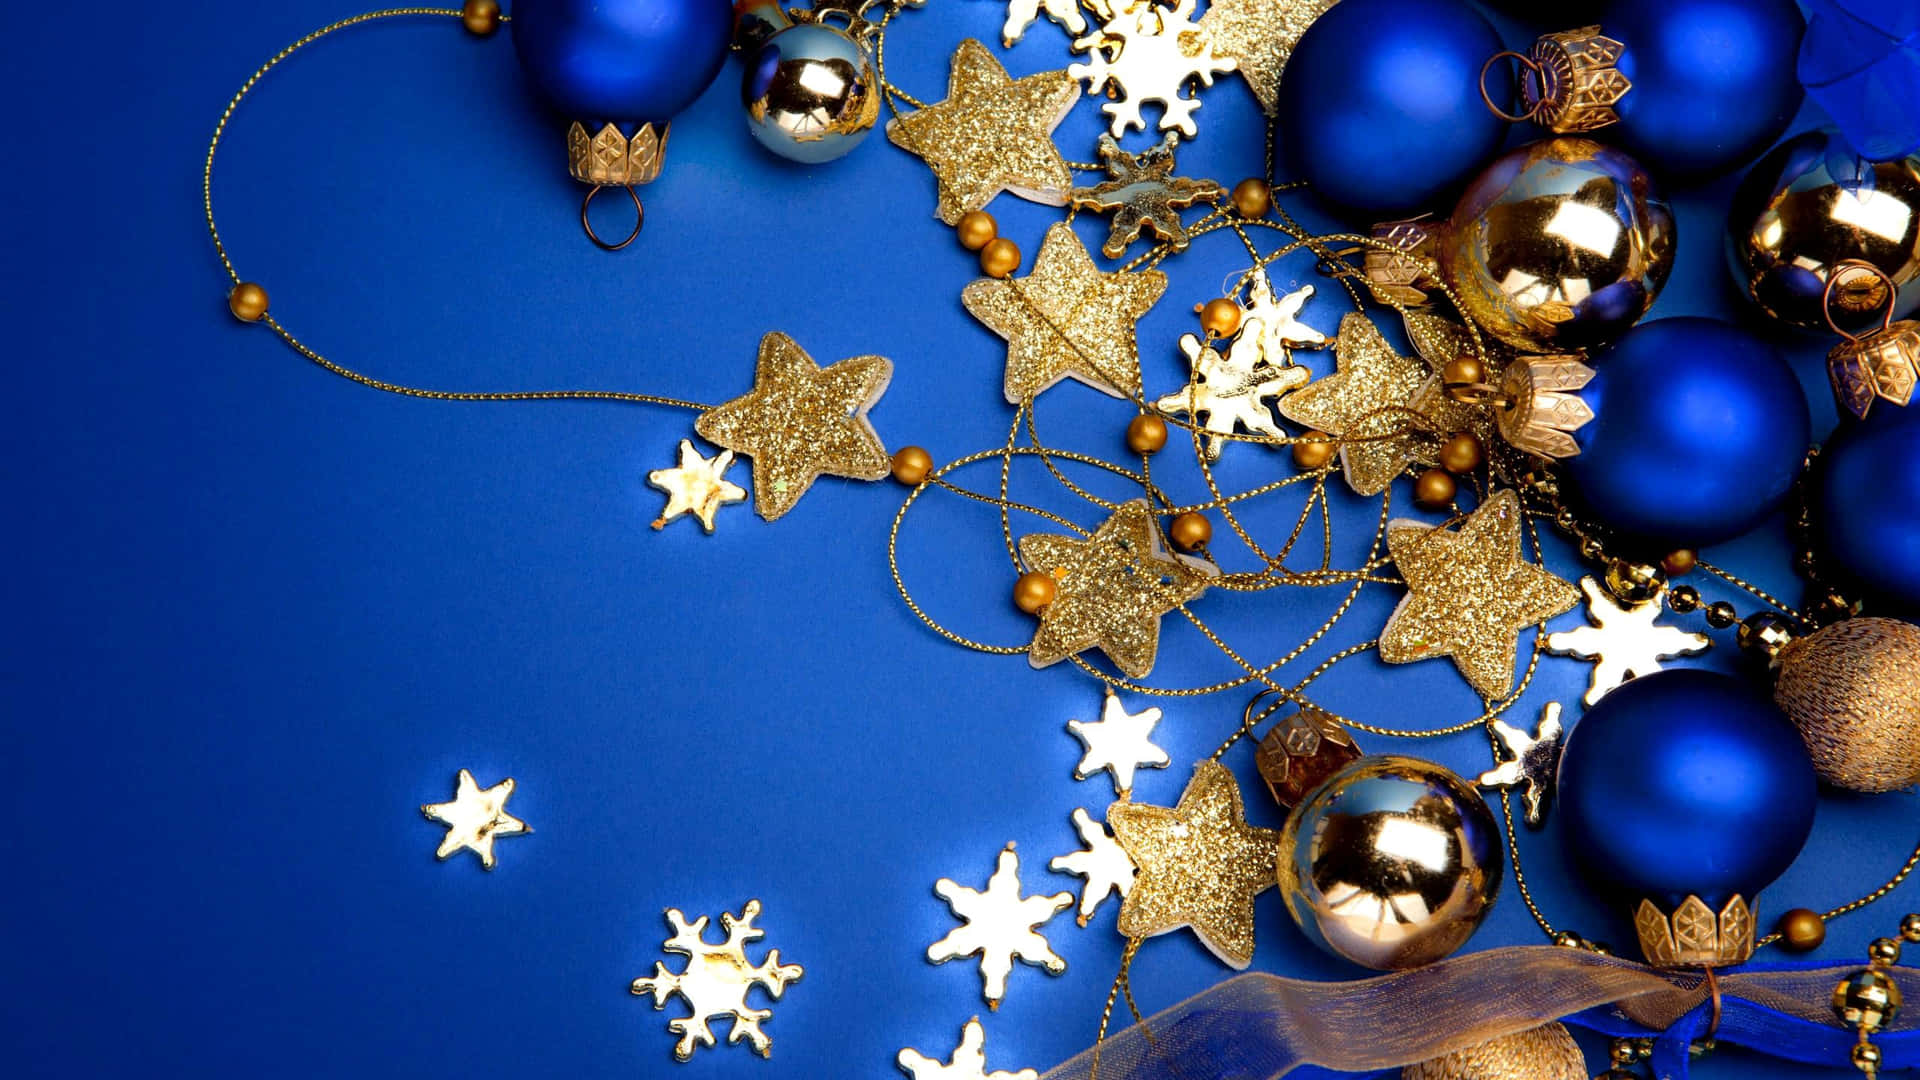 Get into the festive mood with a dazzlingly beautiful gold-themed Christmas celebration. Wallpaper